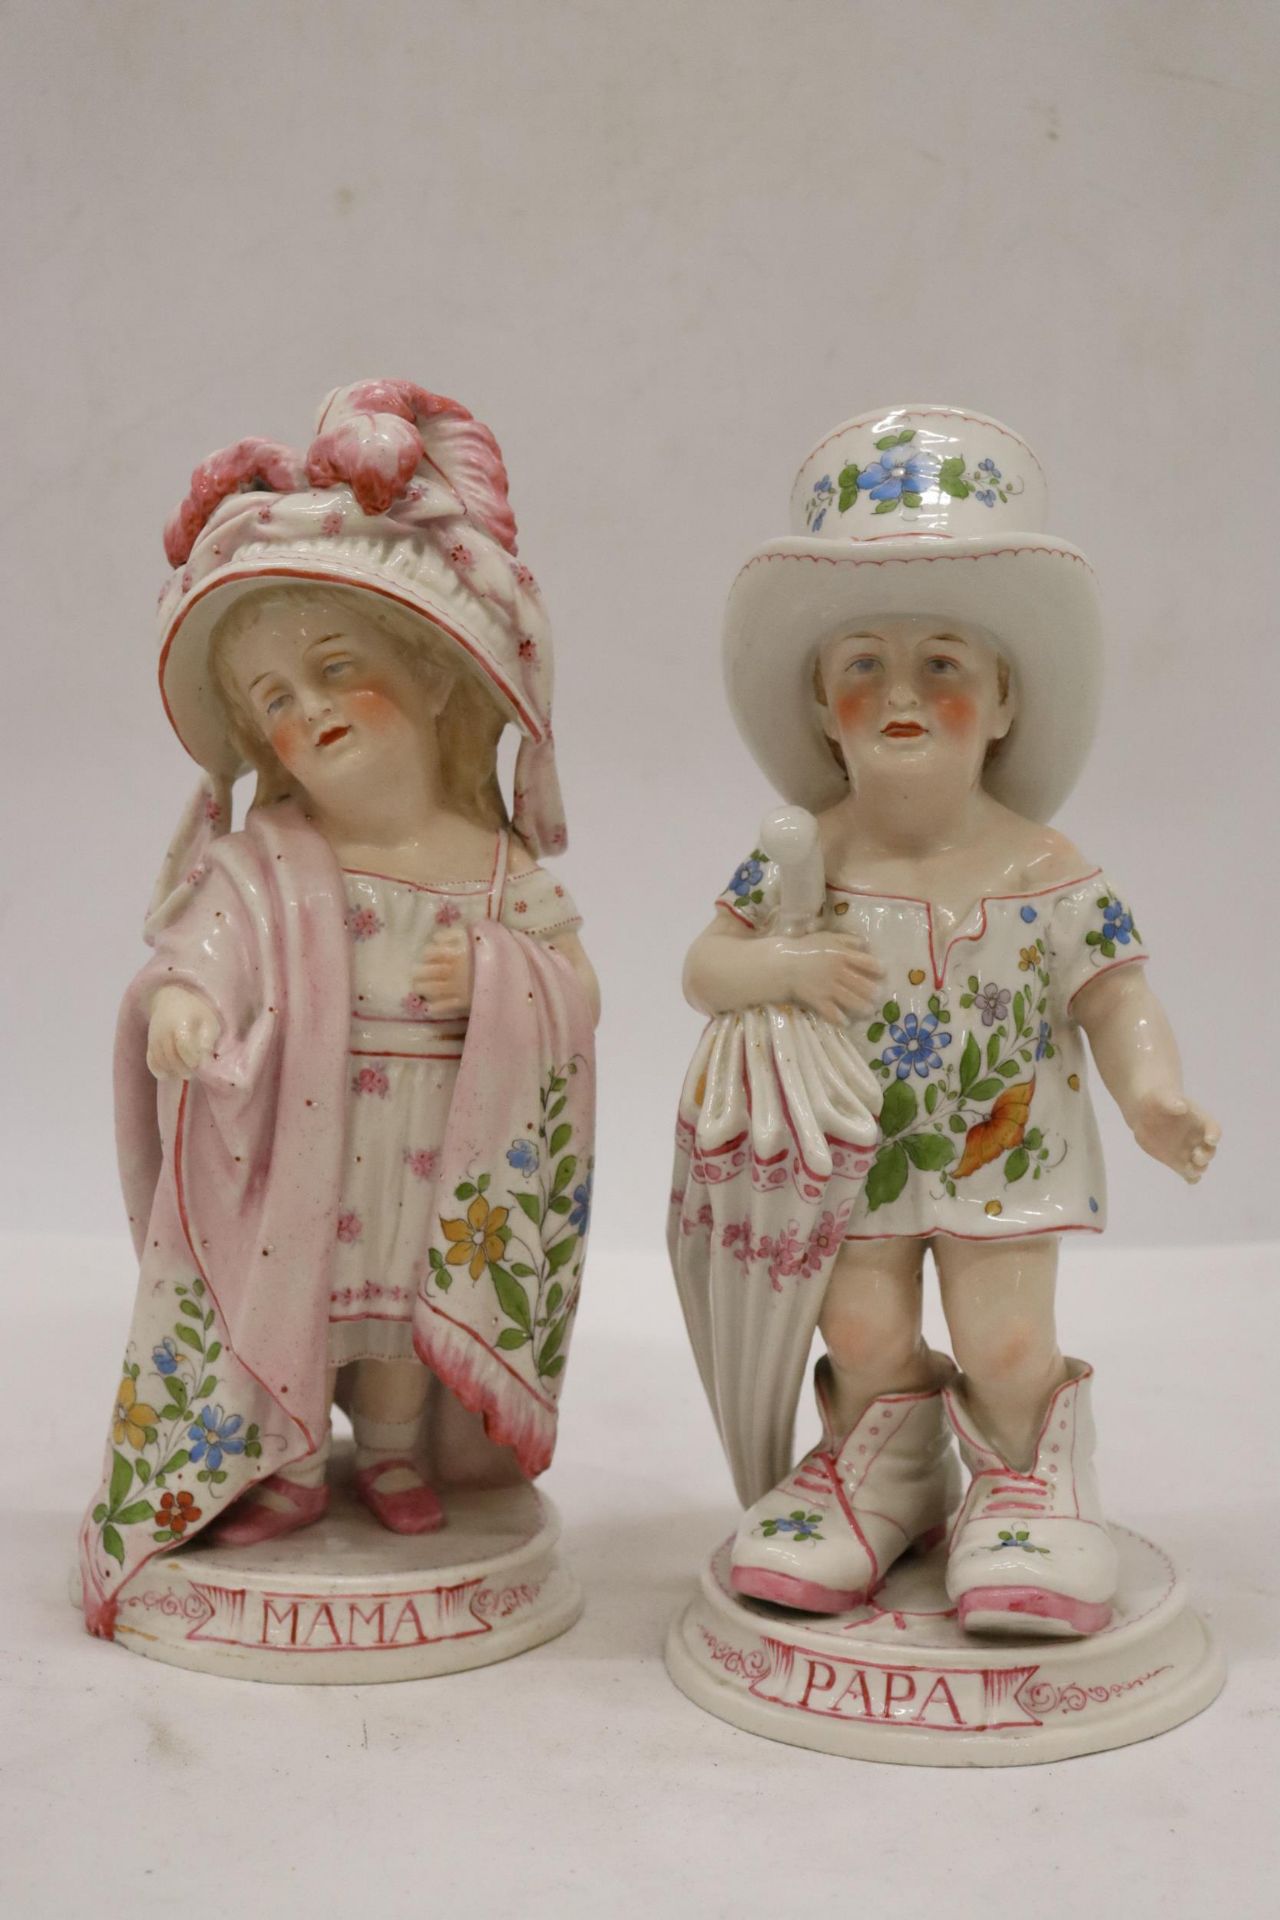 A PAIR OF ANTIQUE ORIGINAL GERMAN PORCELAIN FIGURES, 'MAMA' AND 'PAPA', GOOD COLOURS, HEIGHT